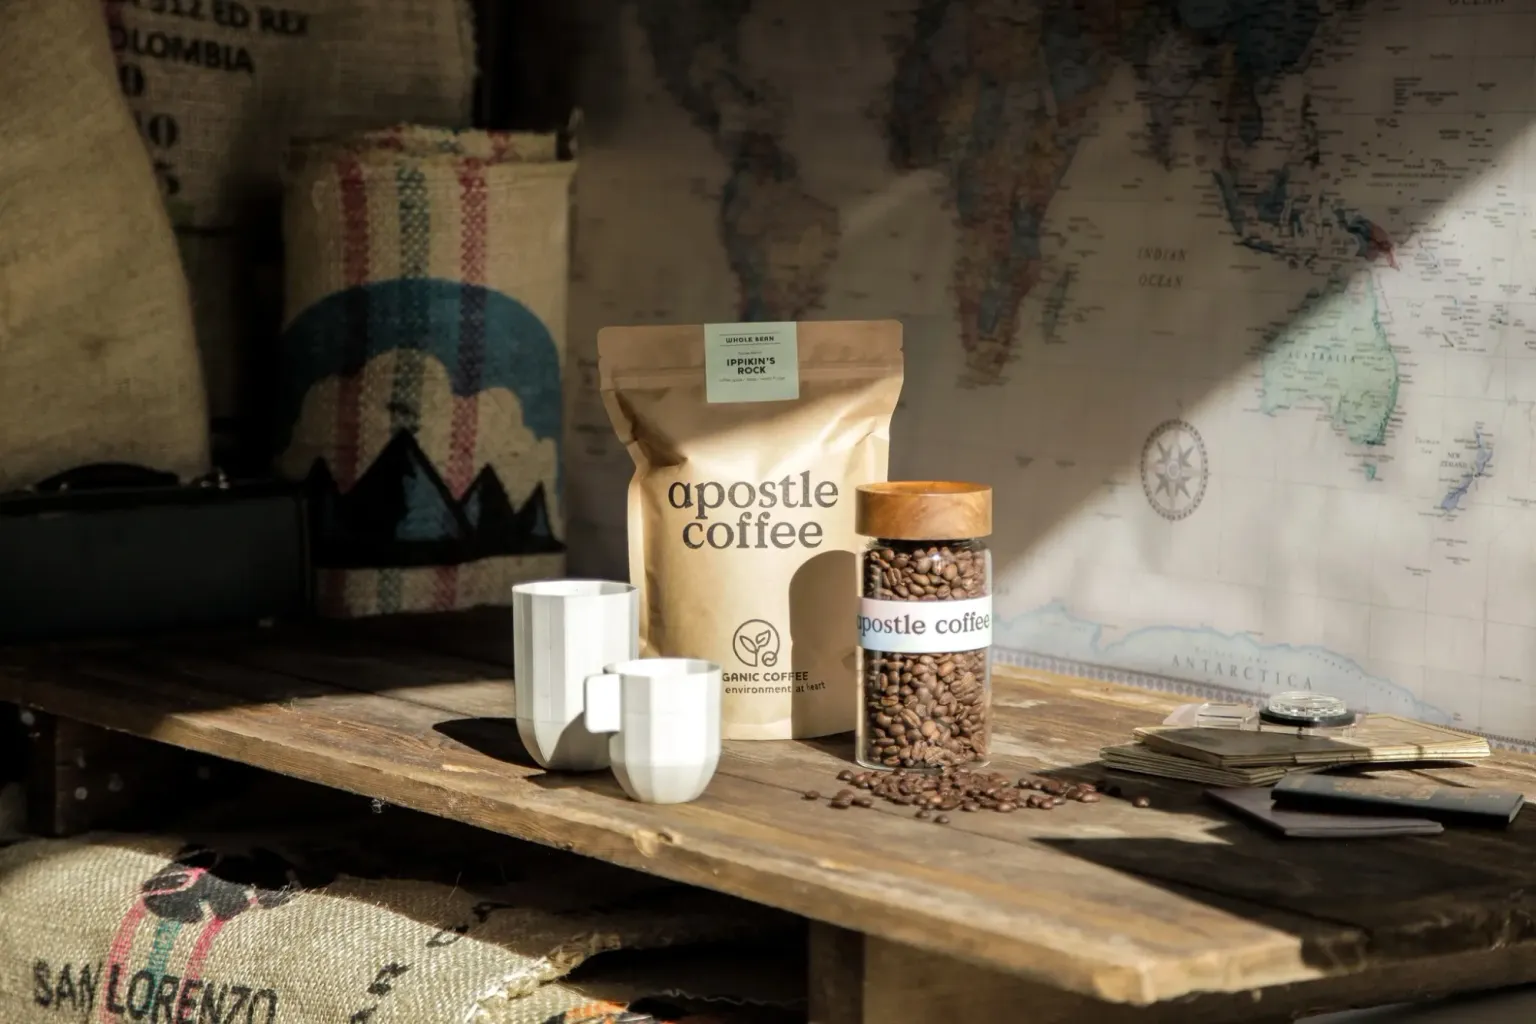 About Apostle Coffee